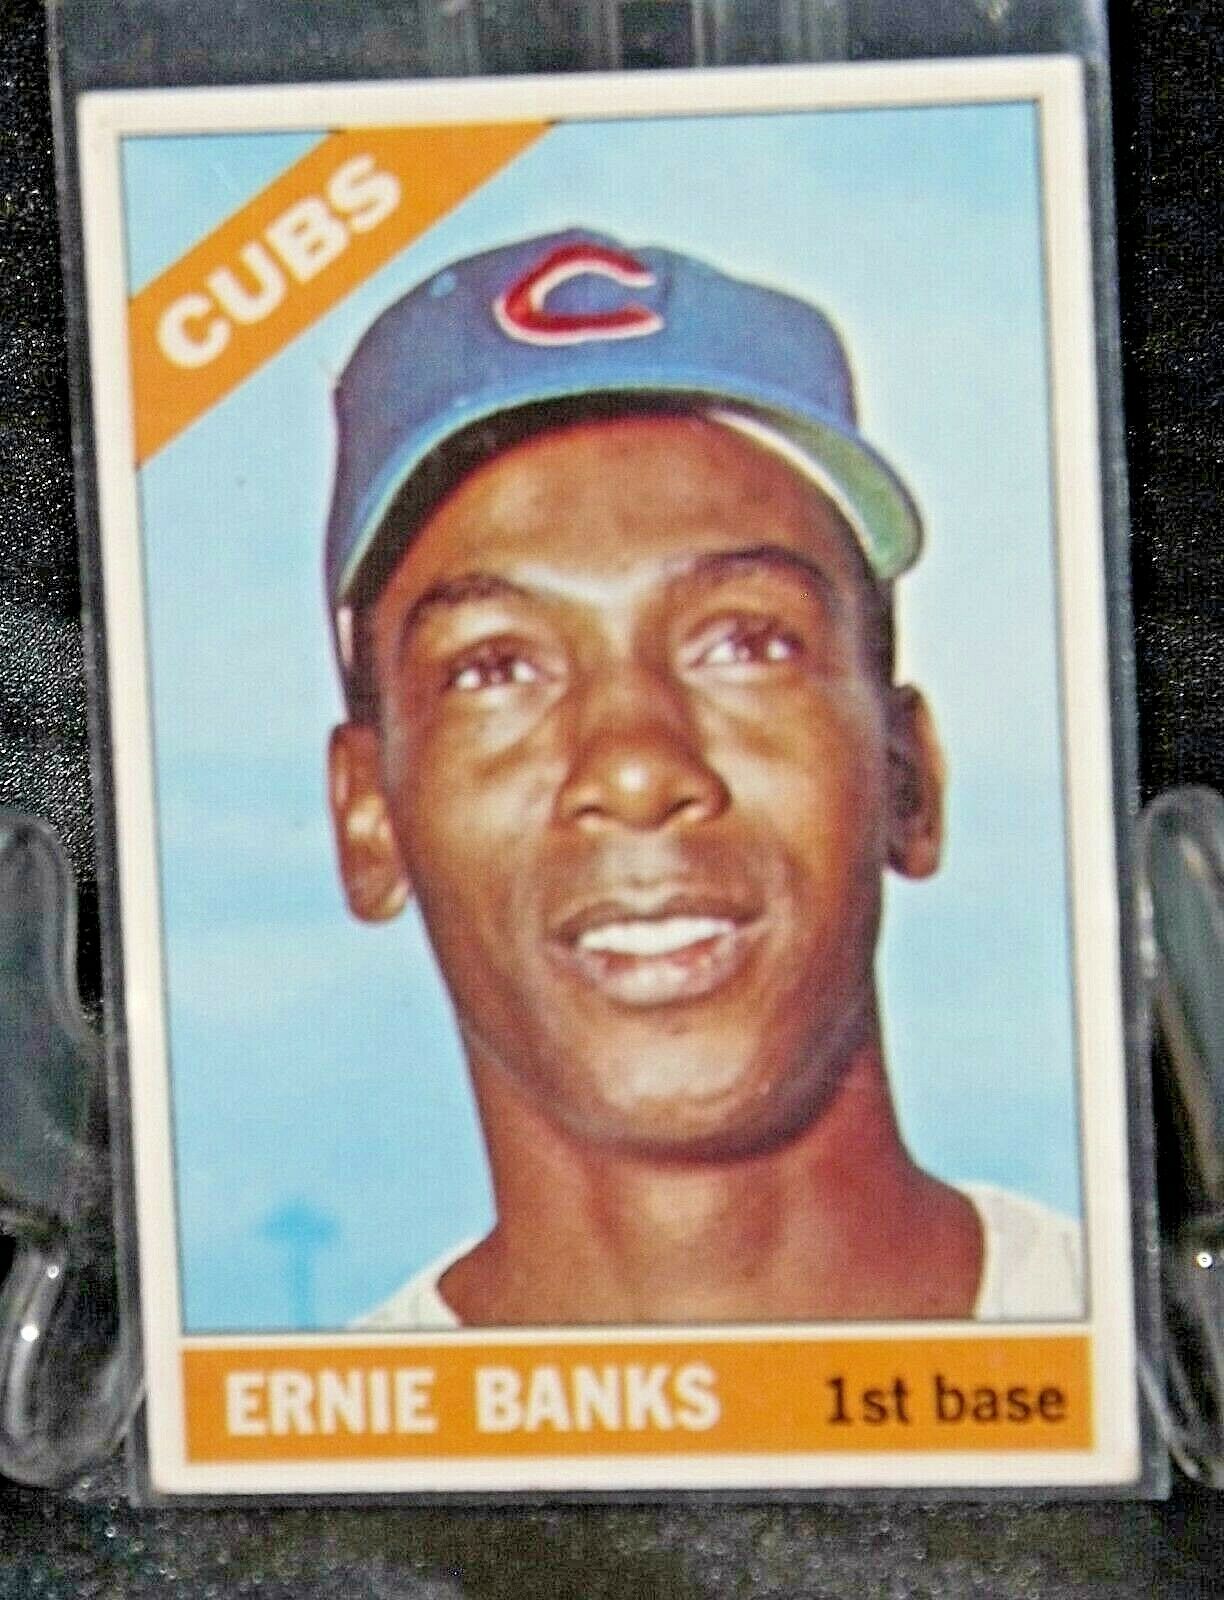 60 Years Ago Today: Ernie Banks makes his Cubs debut